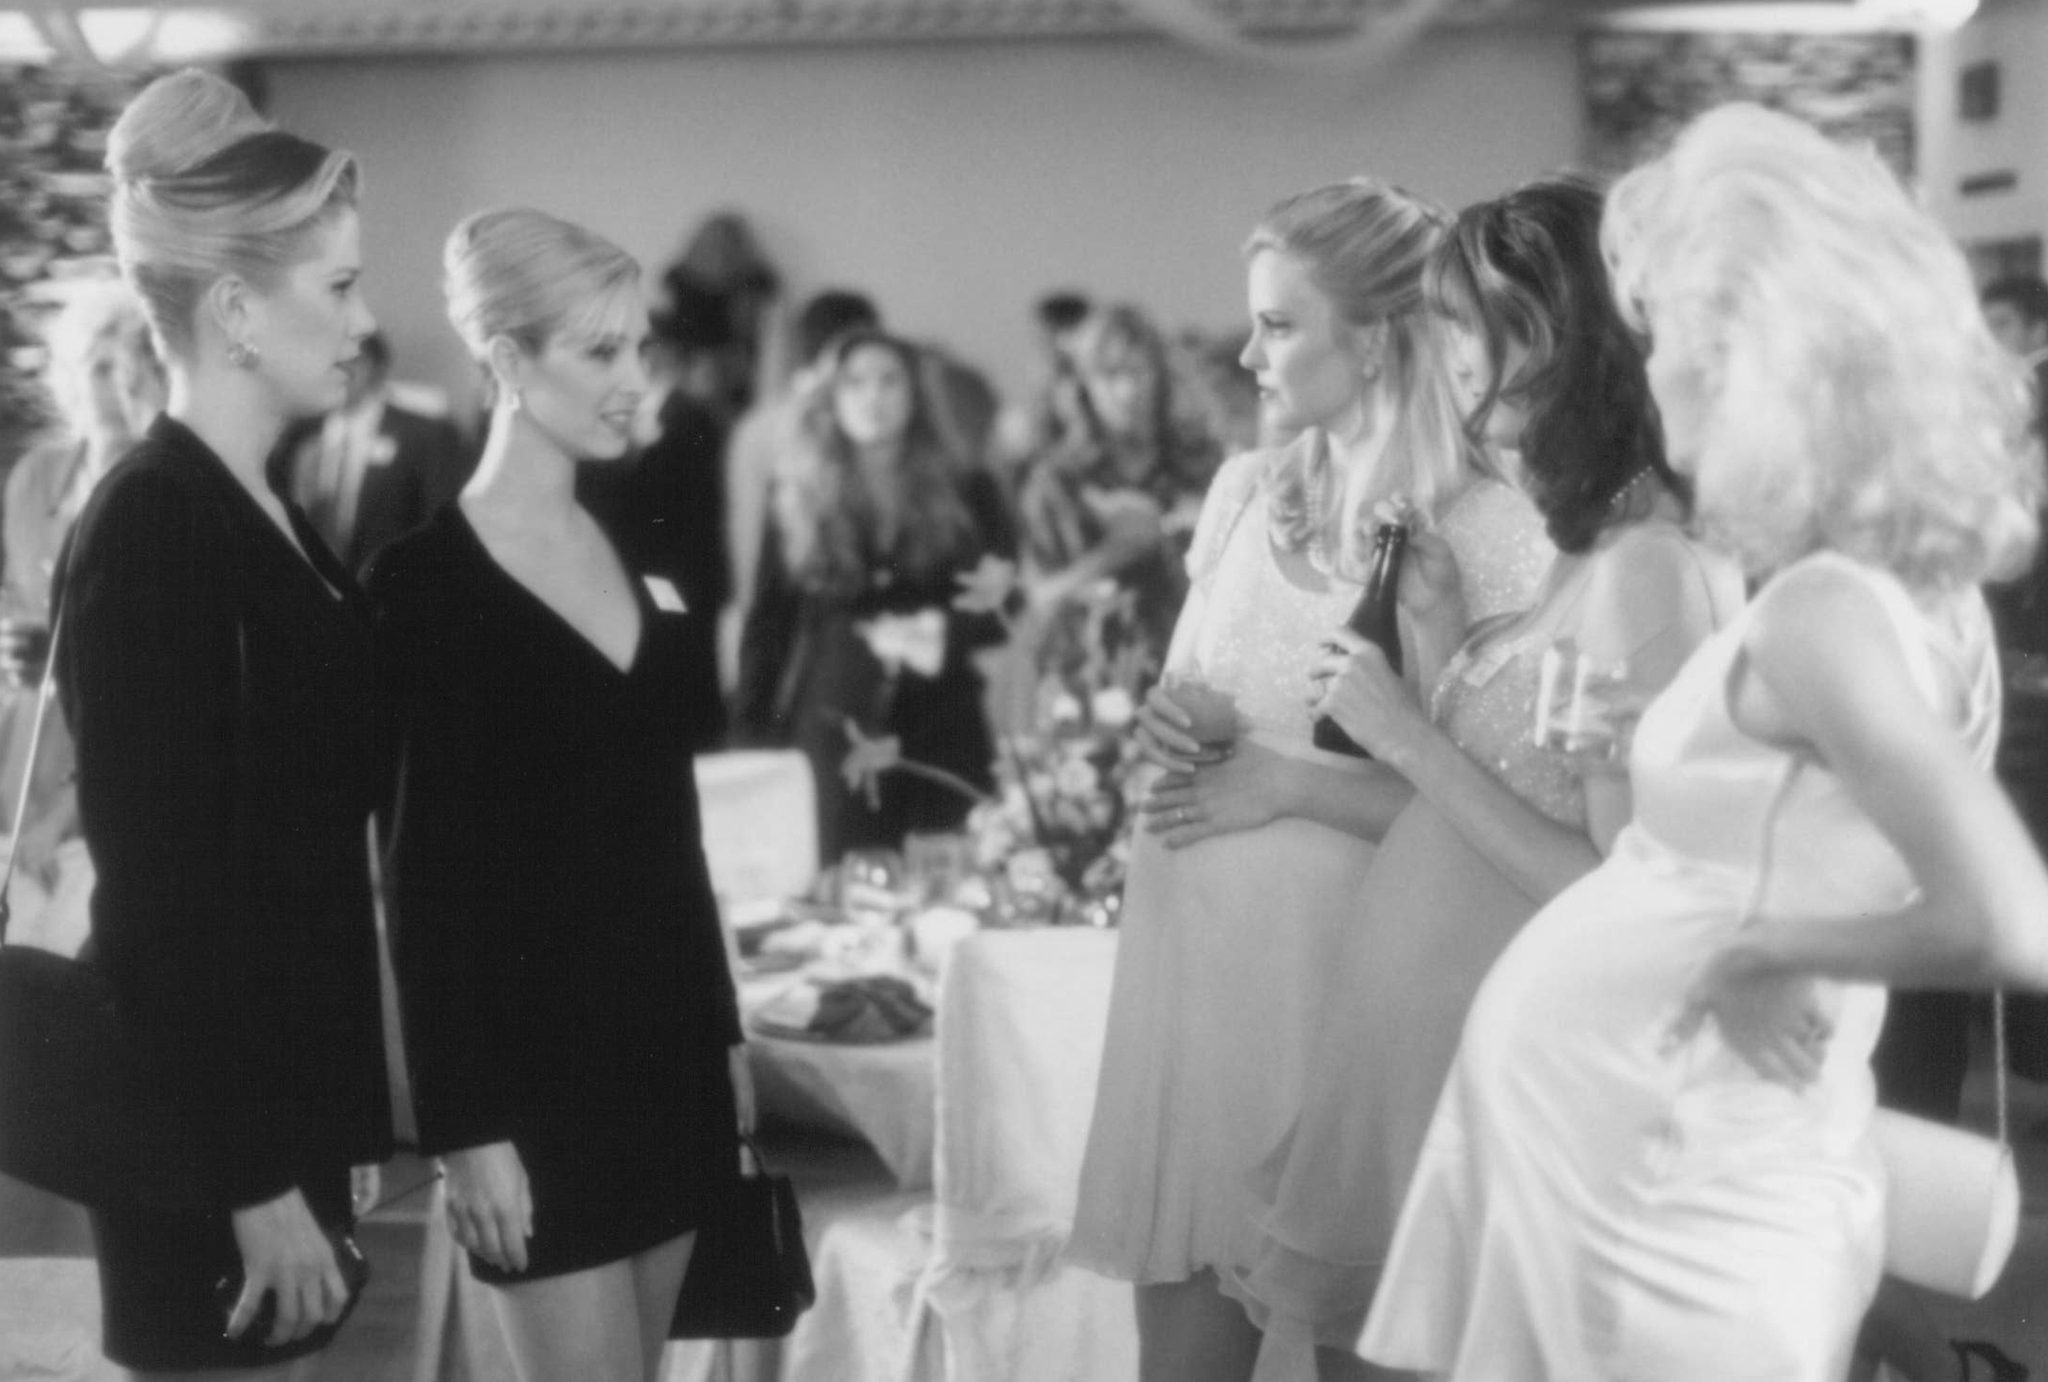 Still of Mira Sorvino, Lisa Kudrow, Kristin Bauer van Straten, Julia Campbell and Mia Cottet in Romy and Michele's High School Reunion (1997)